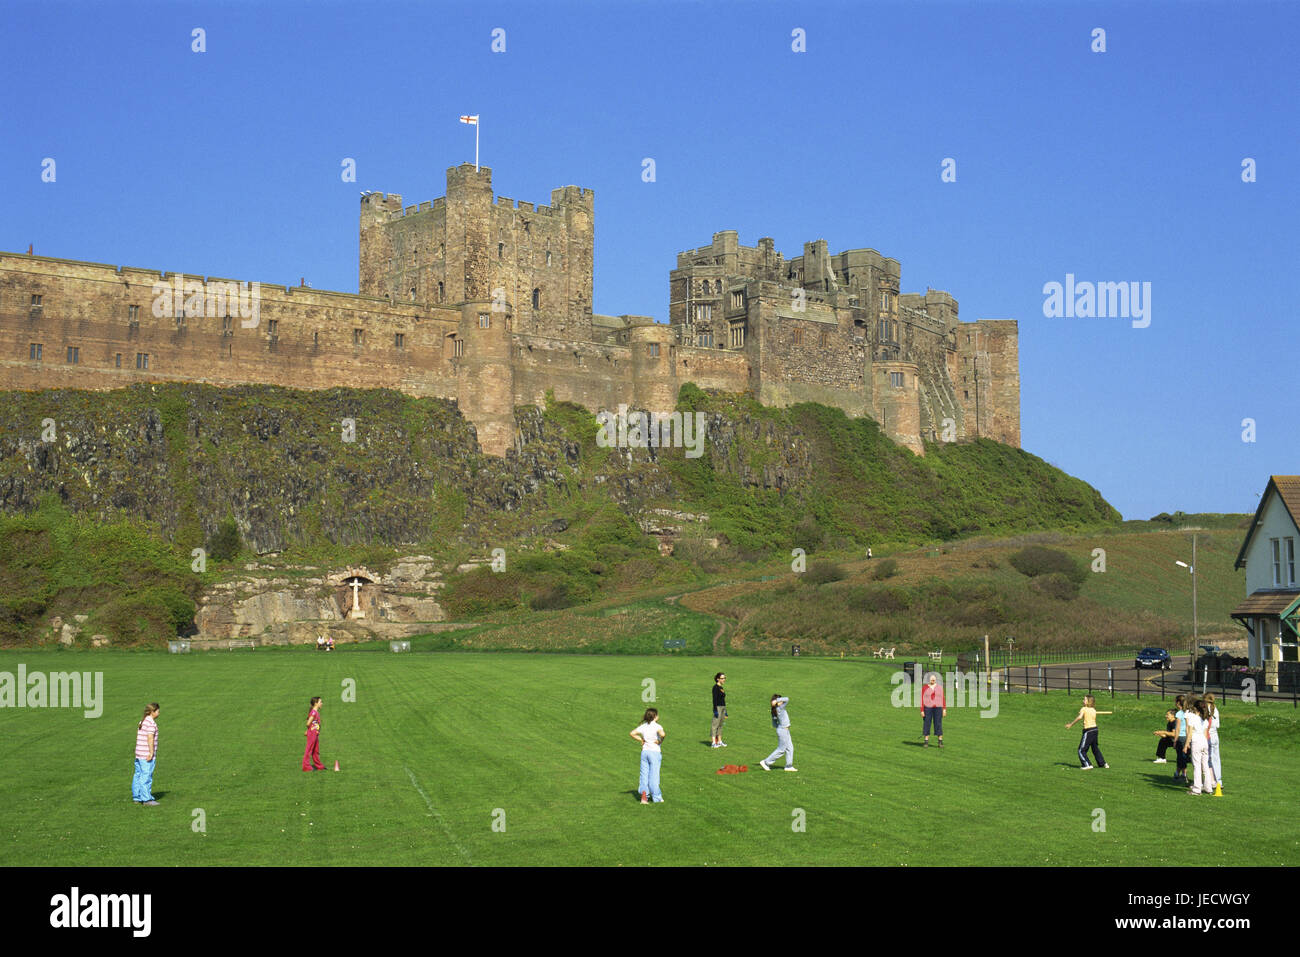 Great Britain, England, Northumbria, Bamburgh, lock, meadow, children, baseball game, no model release, Europe, Northumberland, places of interest, people, culture, historically, scenery, building, architecture, tourism, landmark, fortress, person, game, play, outside, Stock Photo